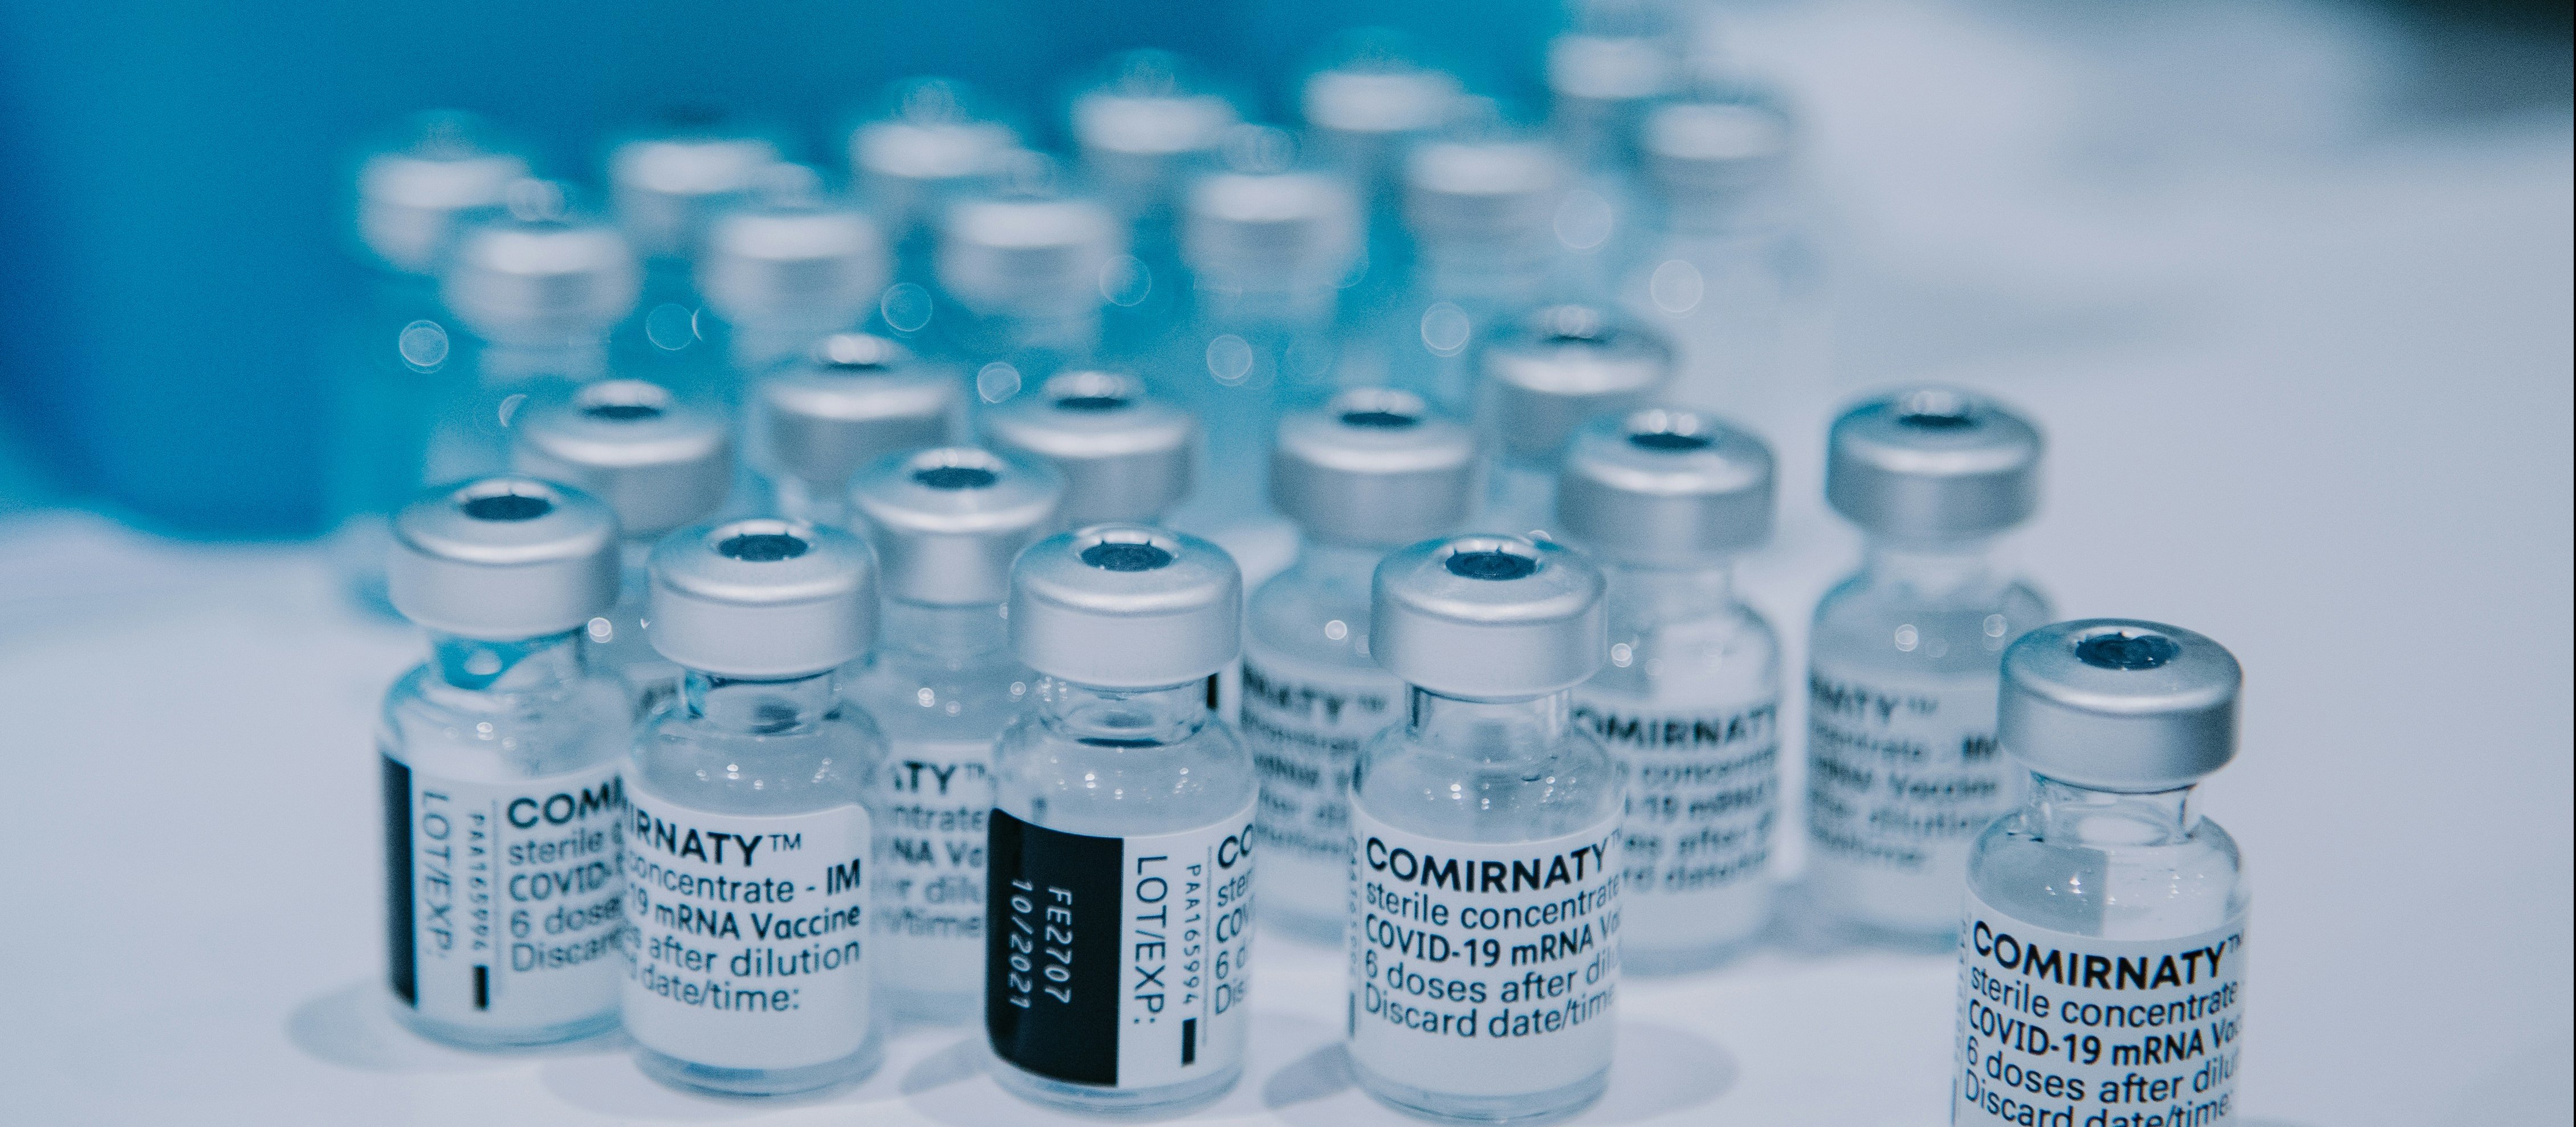 Vials of Comirnaty covid-19 vaccines sitting on a white bench